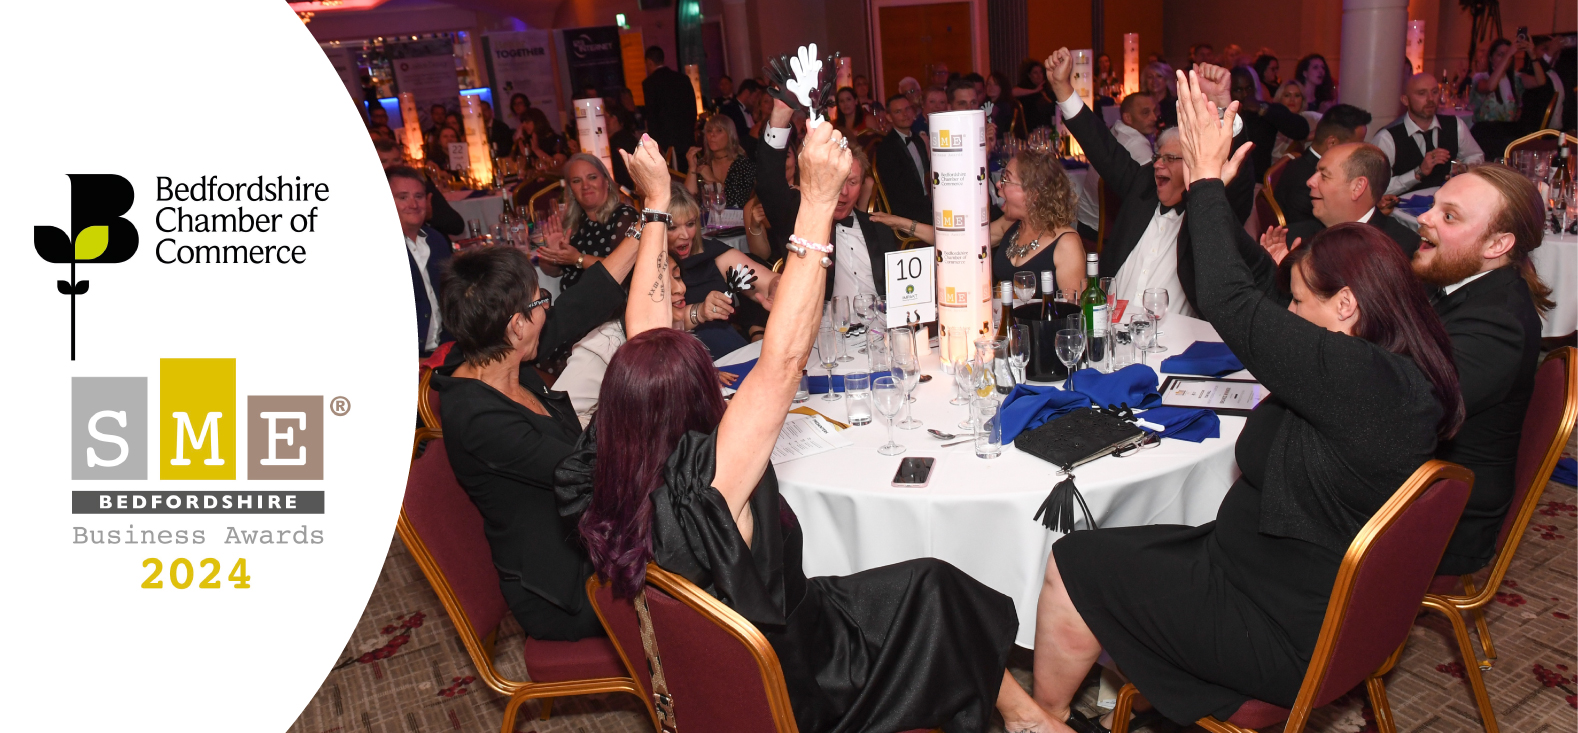 SME Bedfordshire Business Awards 2024: It’s Your Time To Shine!